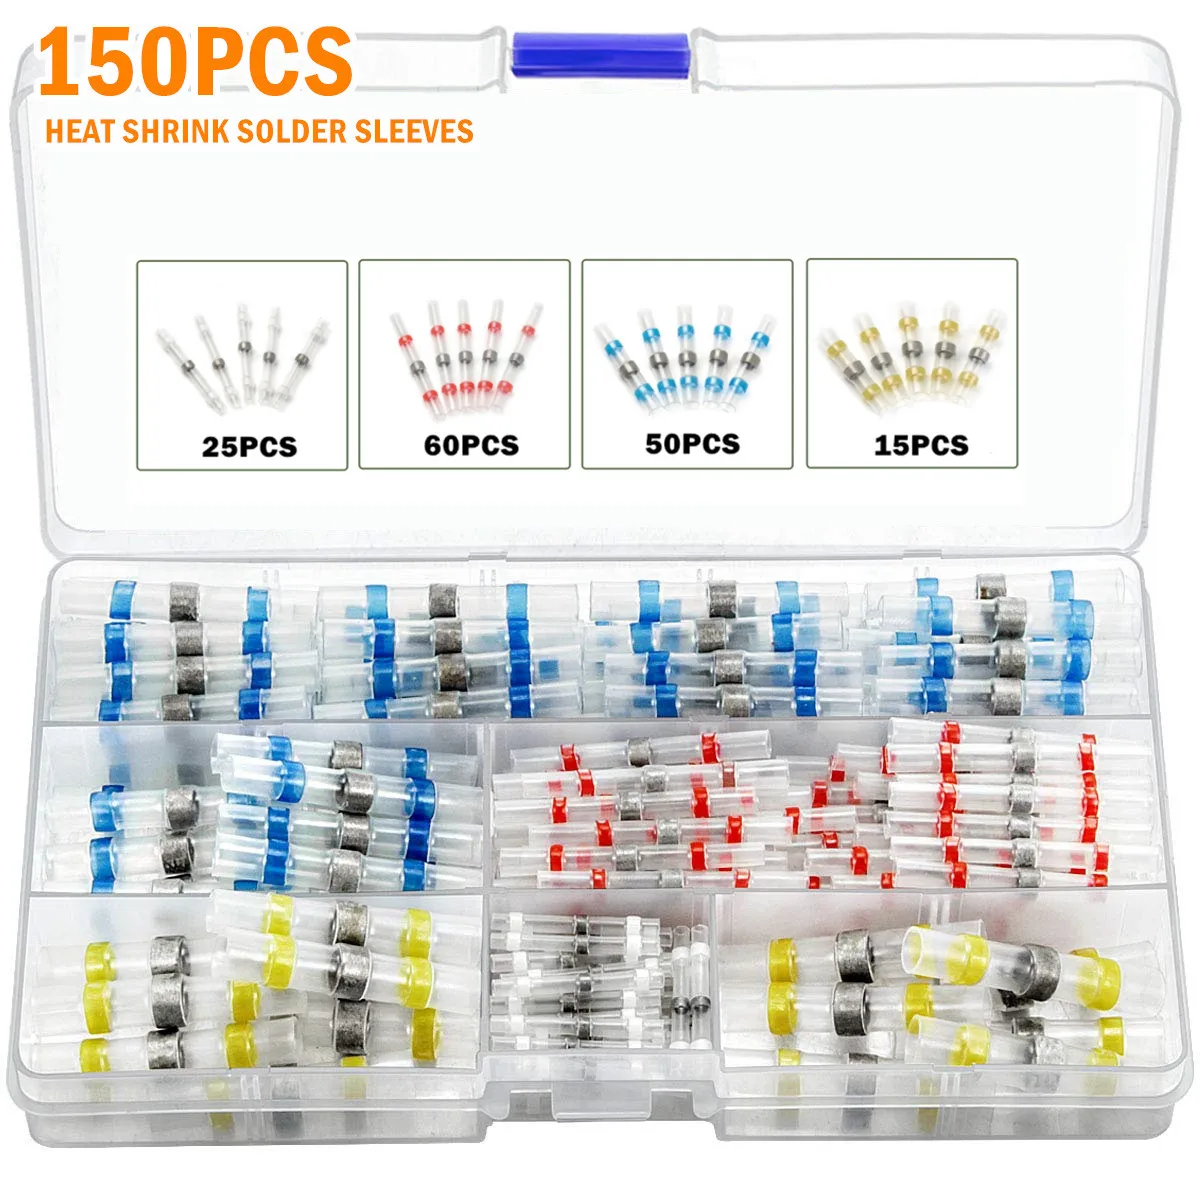 

50PCS Mixed Heat Insulated Waterproof Solder Sleeve Tube Shrink Soldering Sleeving Shrink Connector Terminals Kit